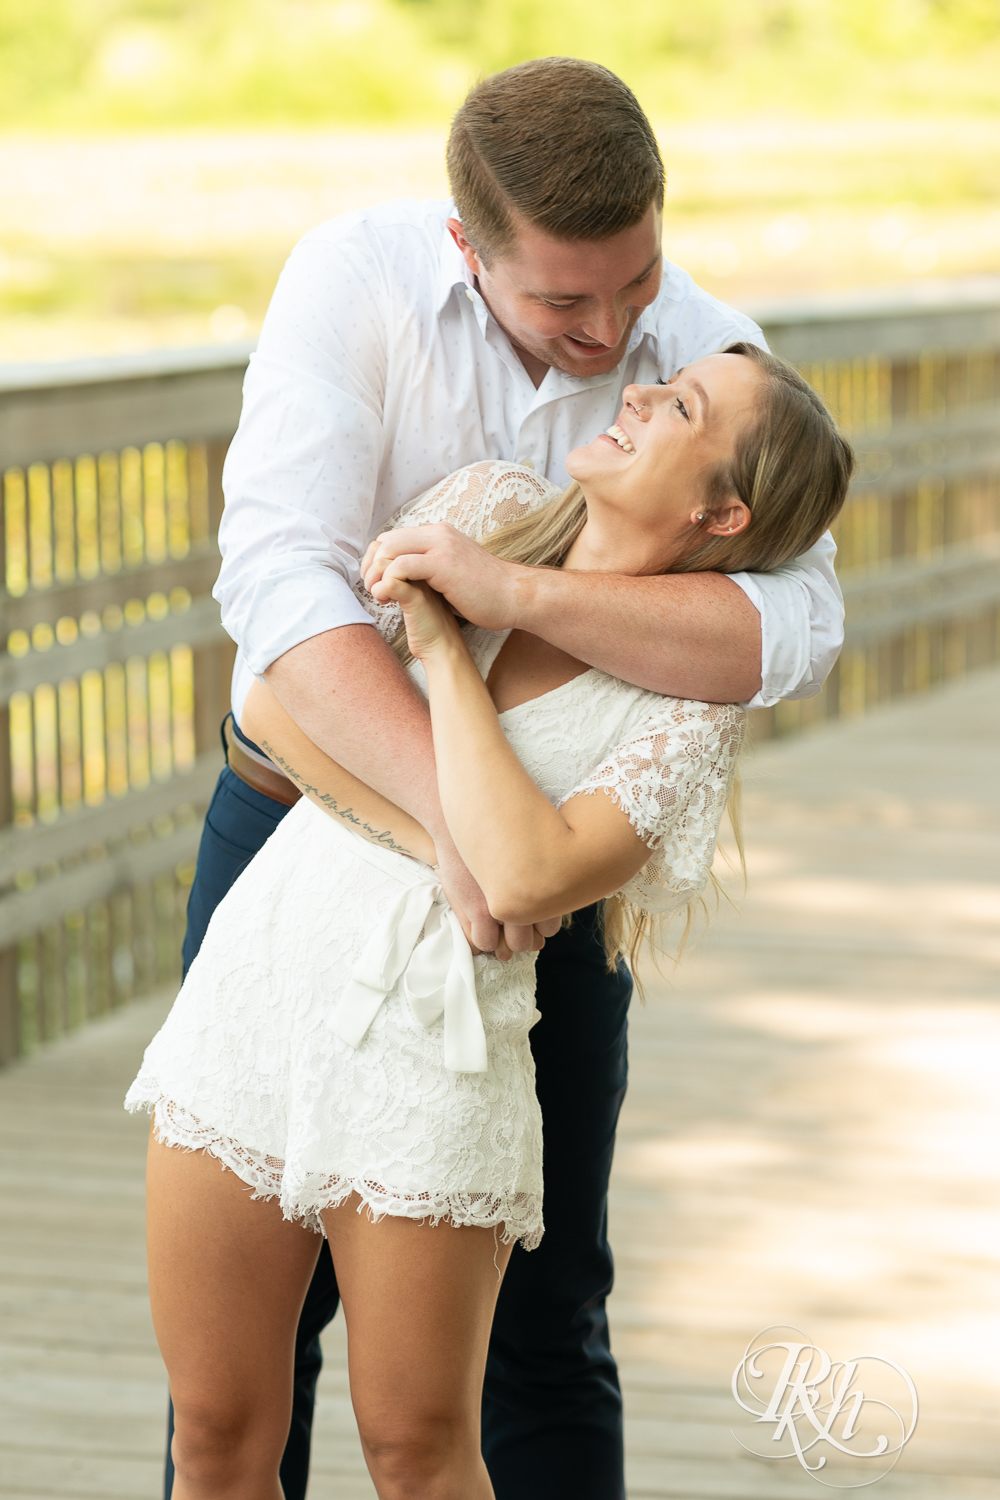 Man and woman dressed in white smile on a bridge during summer engagement photography in Minnesota.